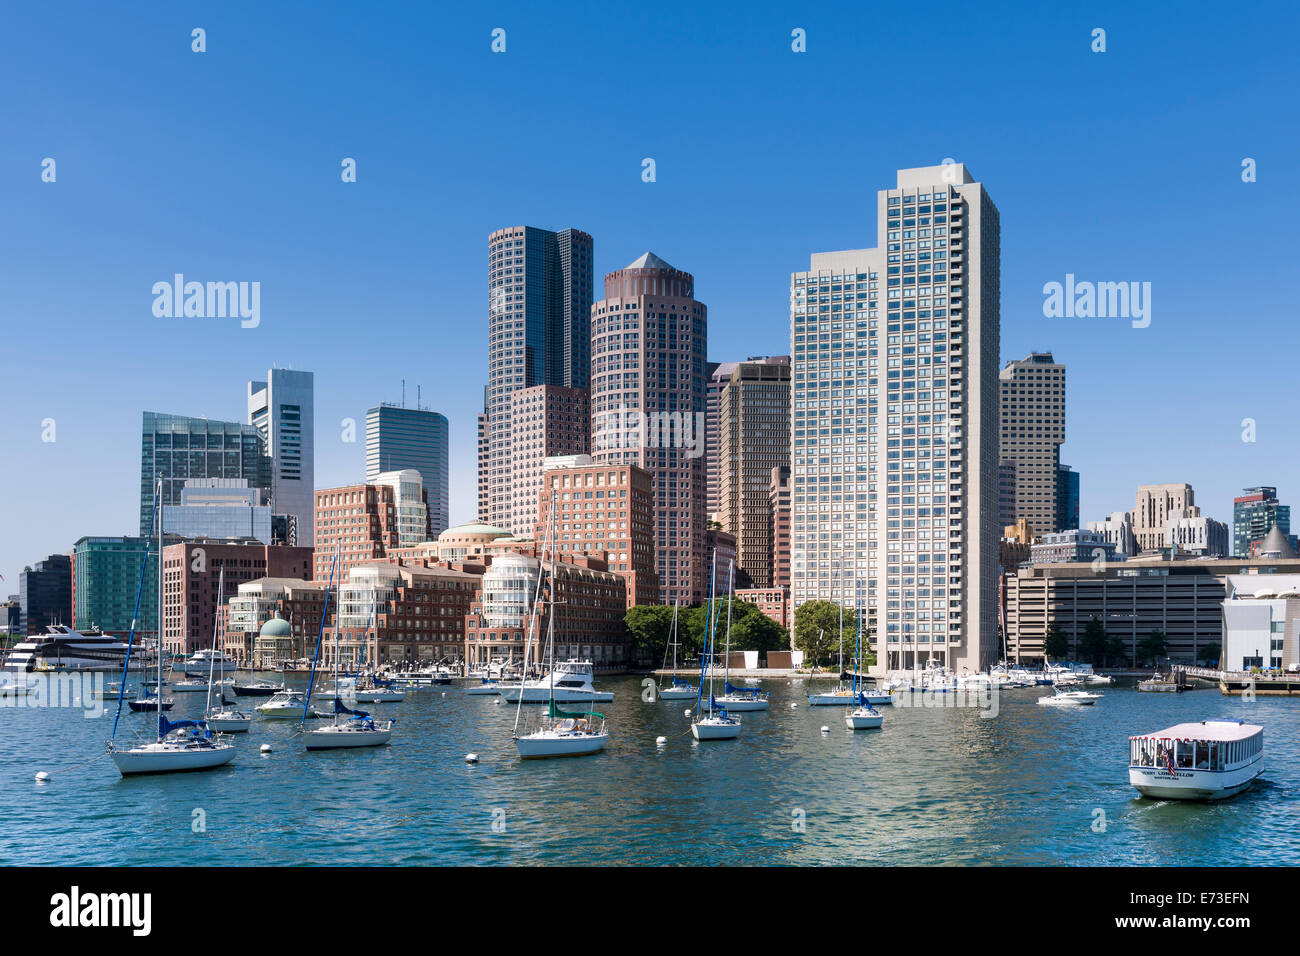 High rise buildings on the Boston skyline from the harbour, looking towards Atlantic Avenue and the Harborwalk. Stock Photo